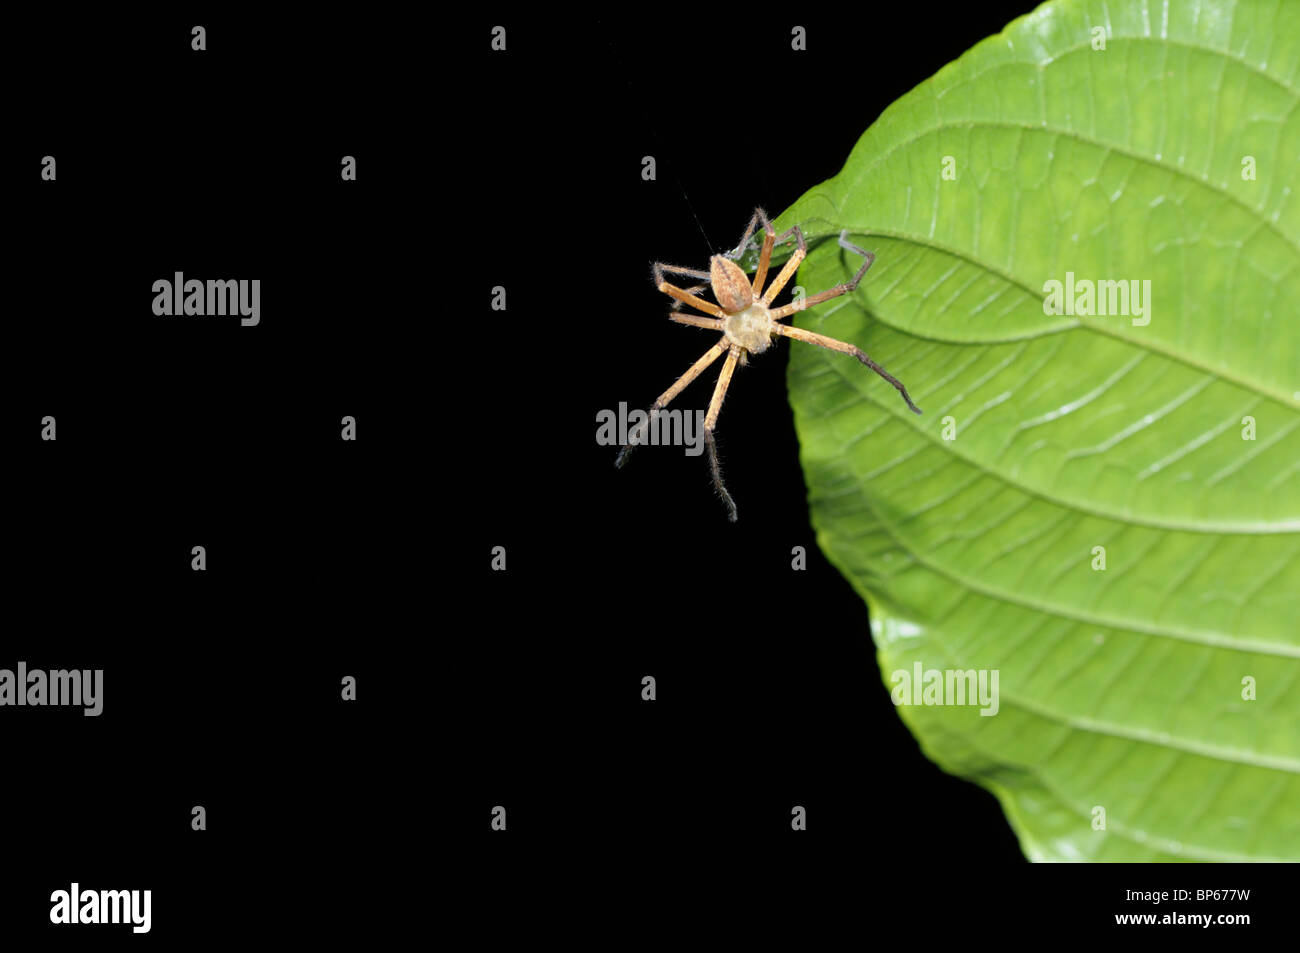 Tropical spider lowering itself from trees above via a silk dragline, rainforest, Chilamate, Costa Rica Stock Photo